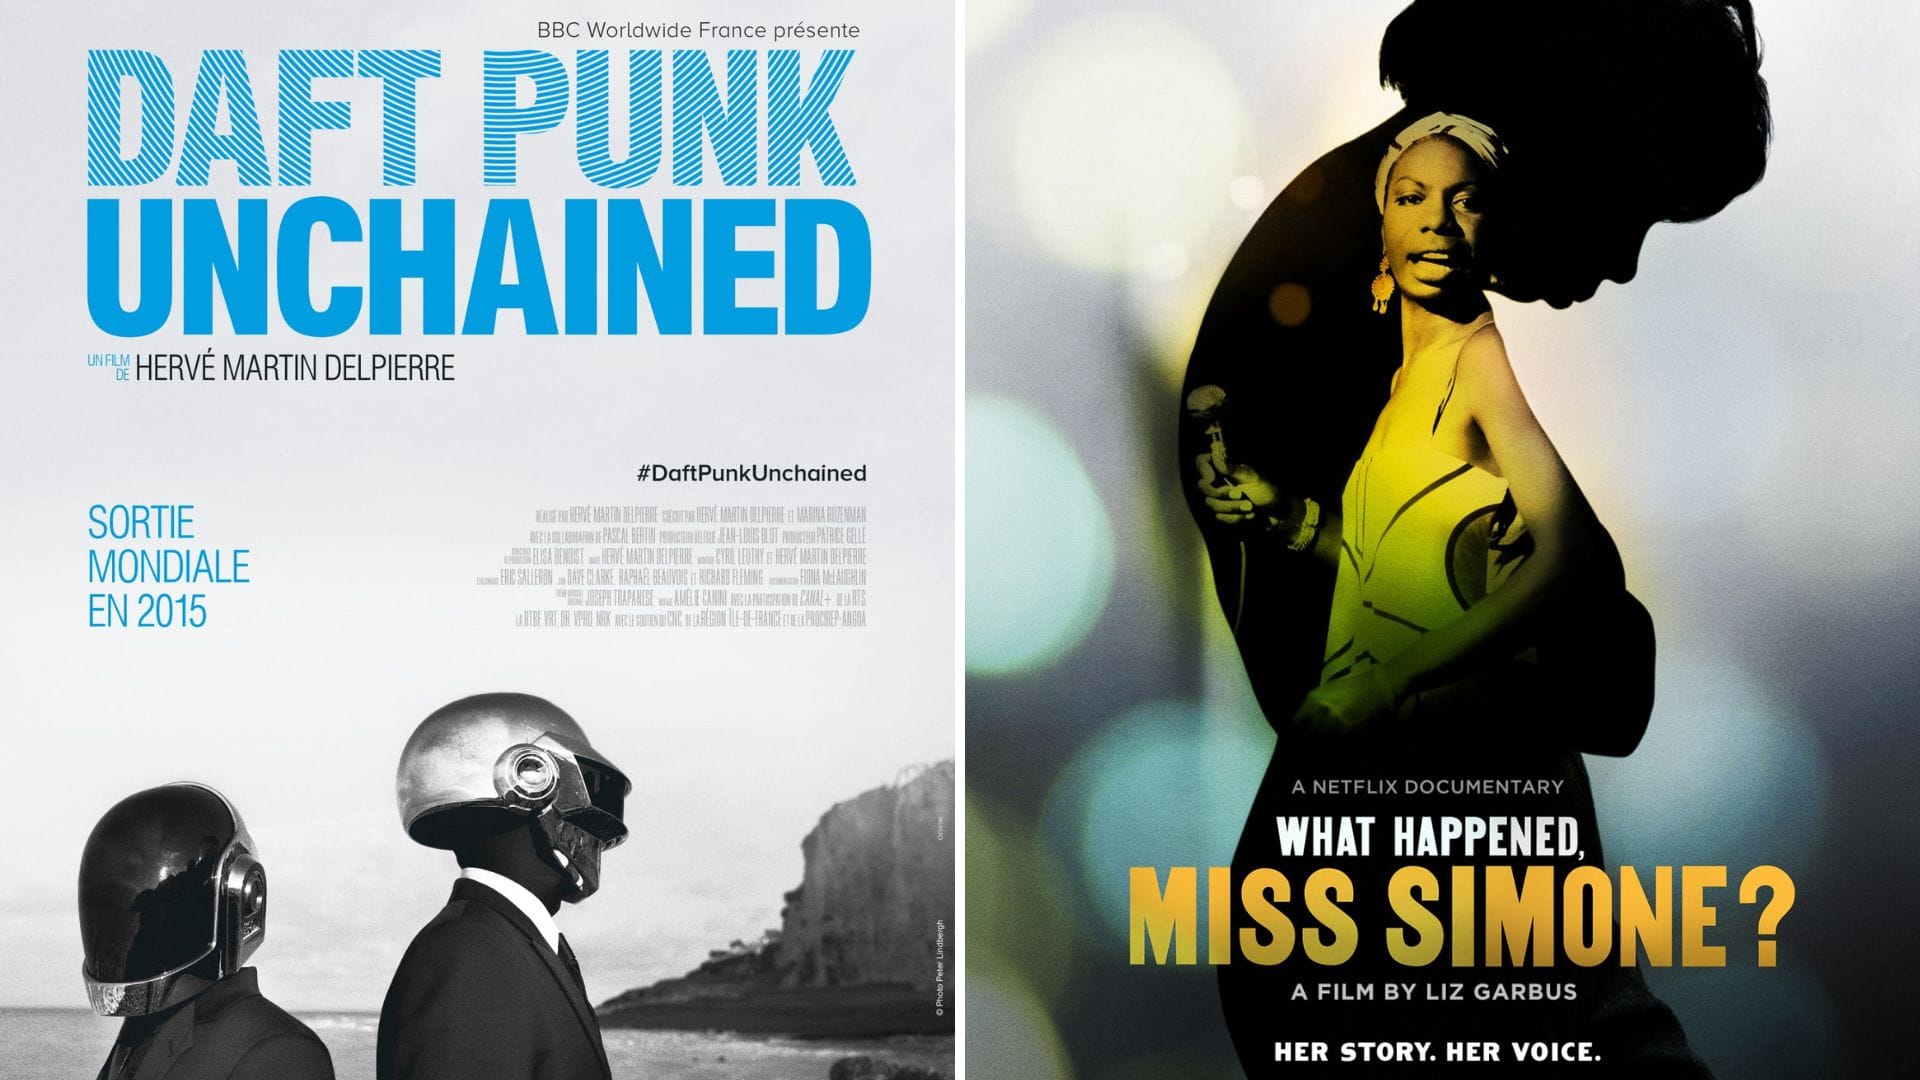 Daft Punk Unchained - What Happened, Miss Simone? affiches documentaires